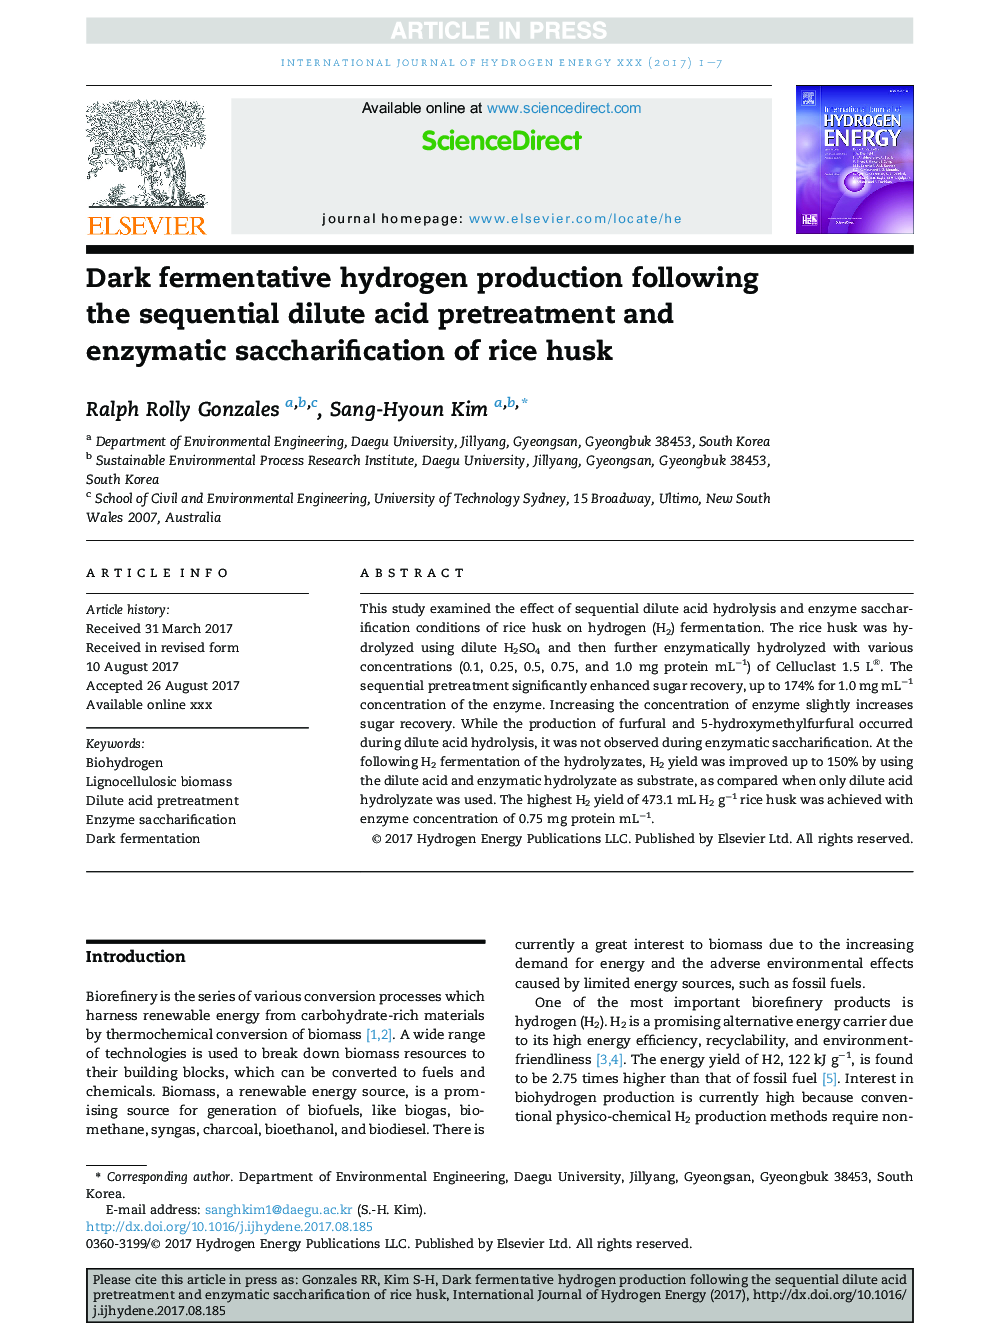 Dark fermentative hydrogen production following the sequential dilute acid pretreatment and enzymatic saccharification of rice husk